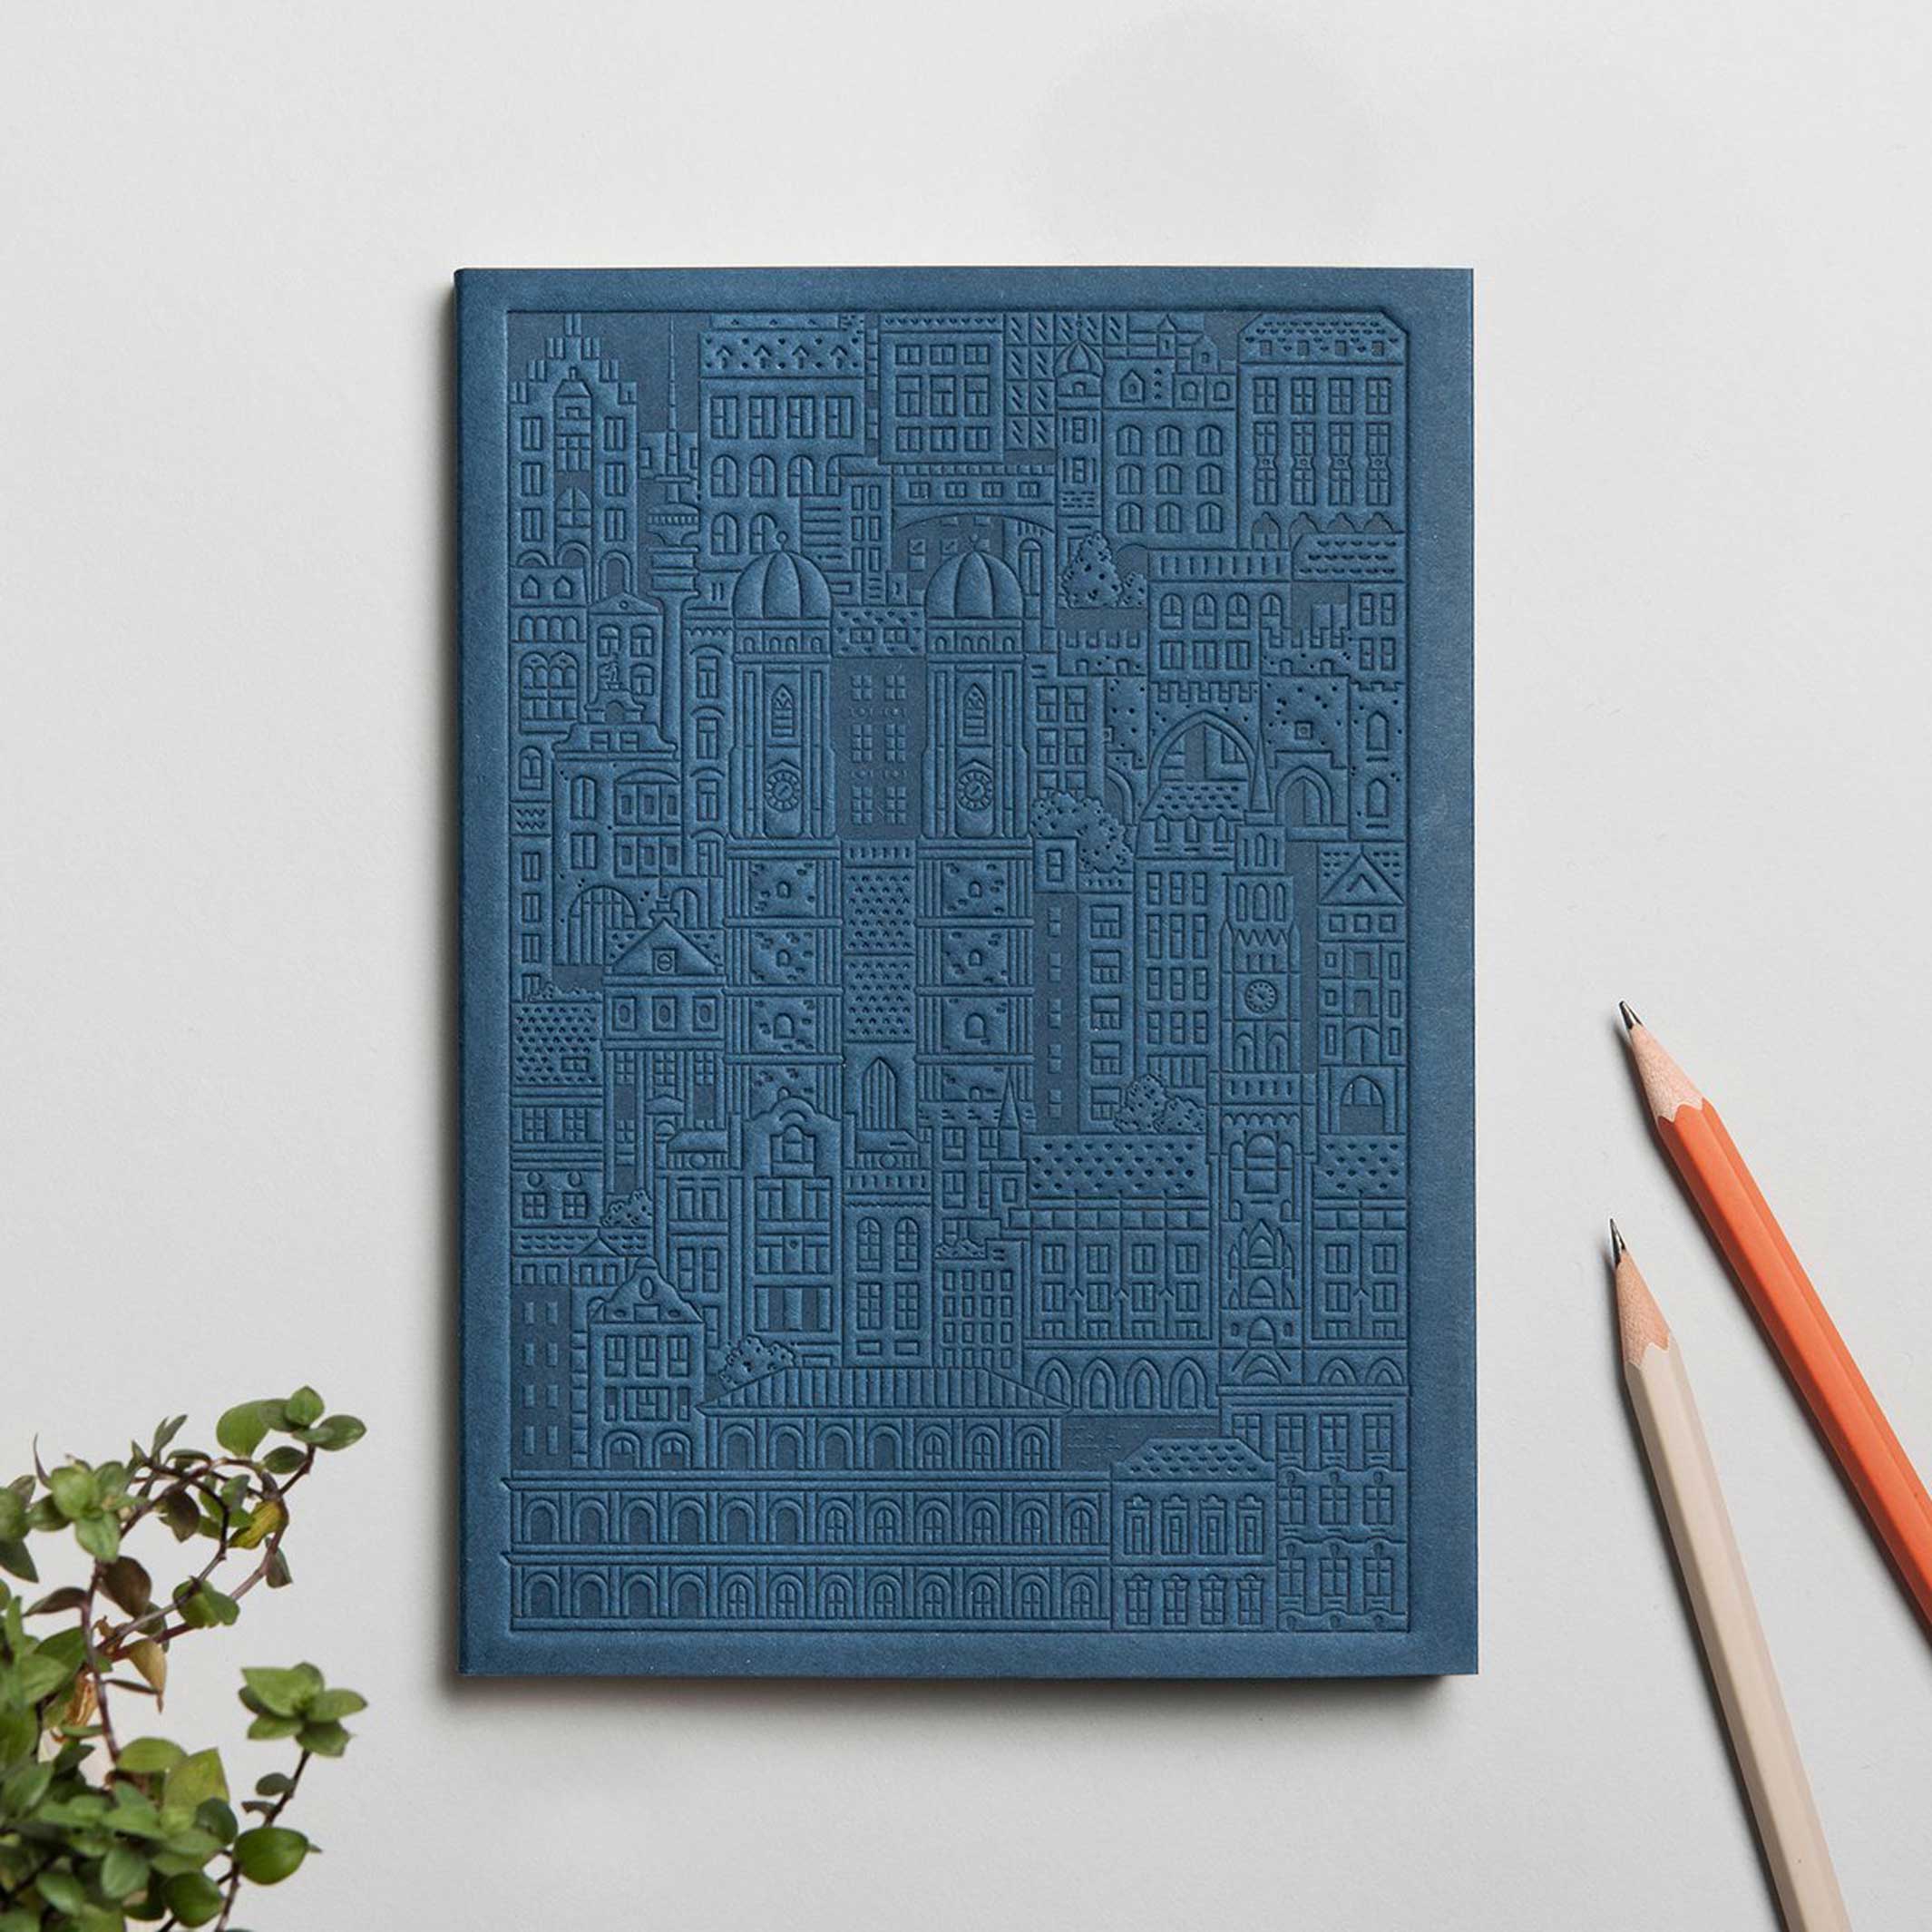 MUNICH NOTEBOOK | 18x13 cm & 128 pages | the city works